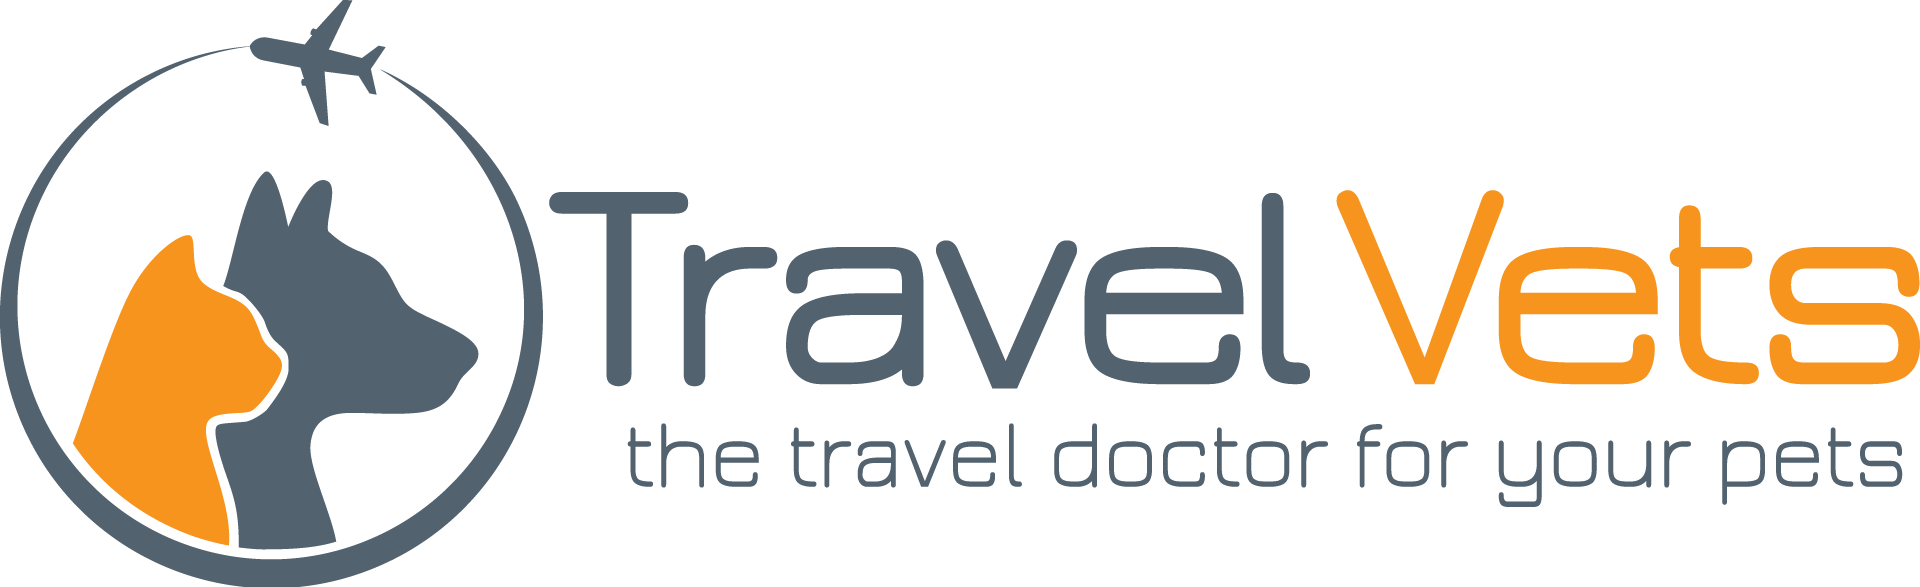 Generic Travel Logo - Pet Transport Archives | Travel Vets... the travel doctor for your pets.